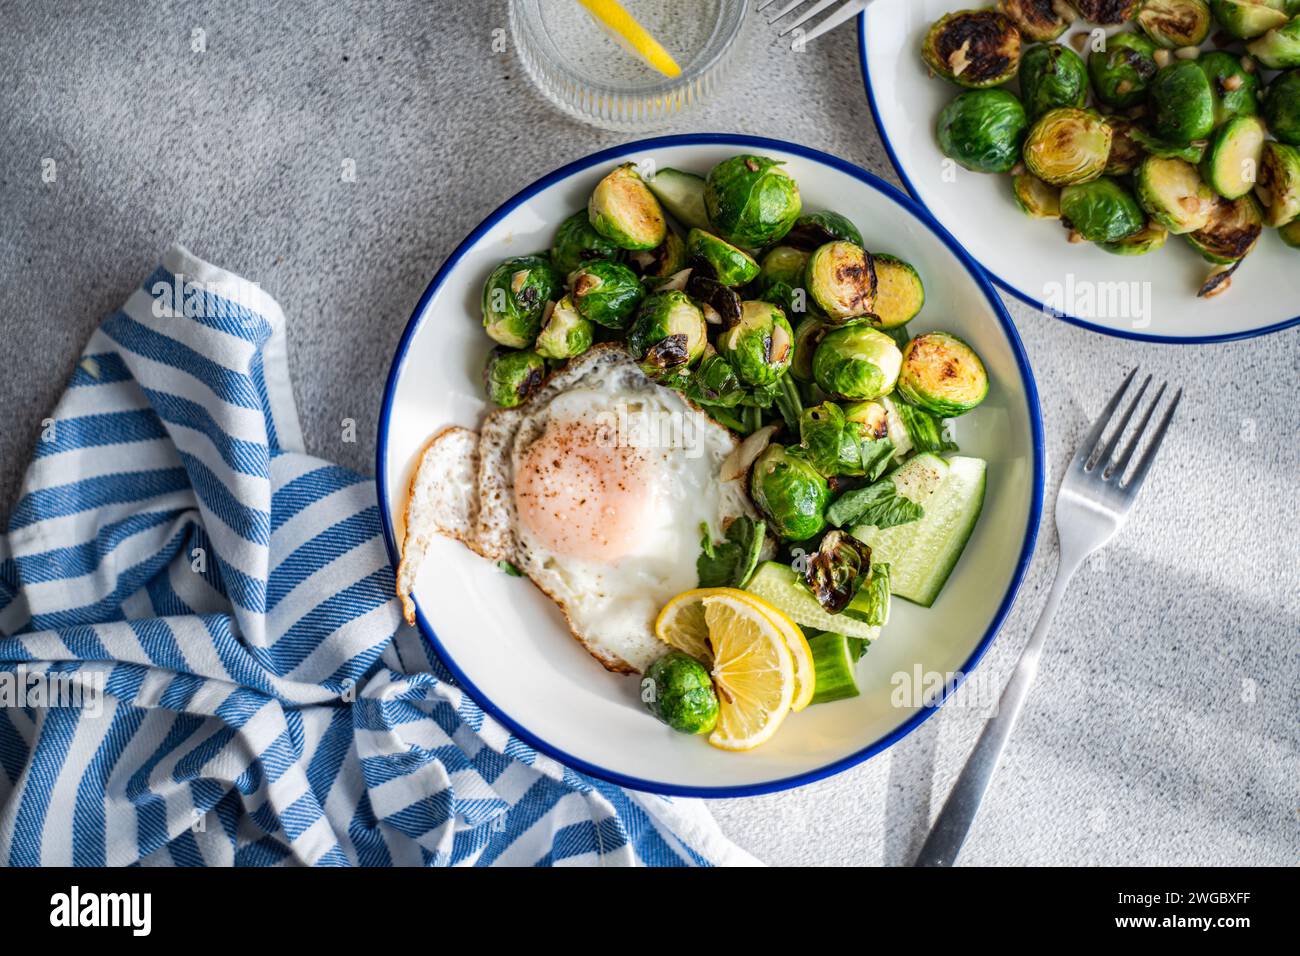 Overhead view of a fried egg with grilled Brussels sprouts, cucumber salad and a glass of lemon water Stock Photo